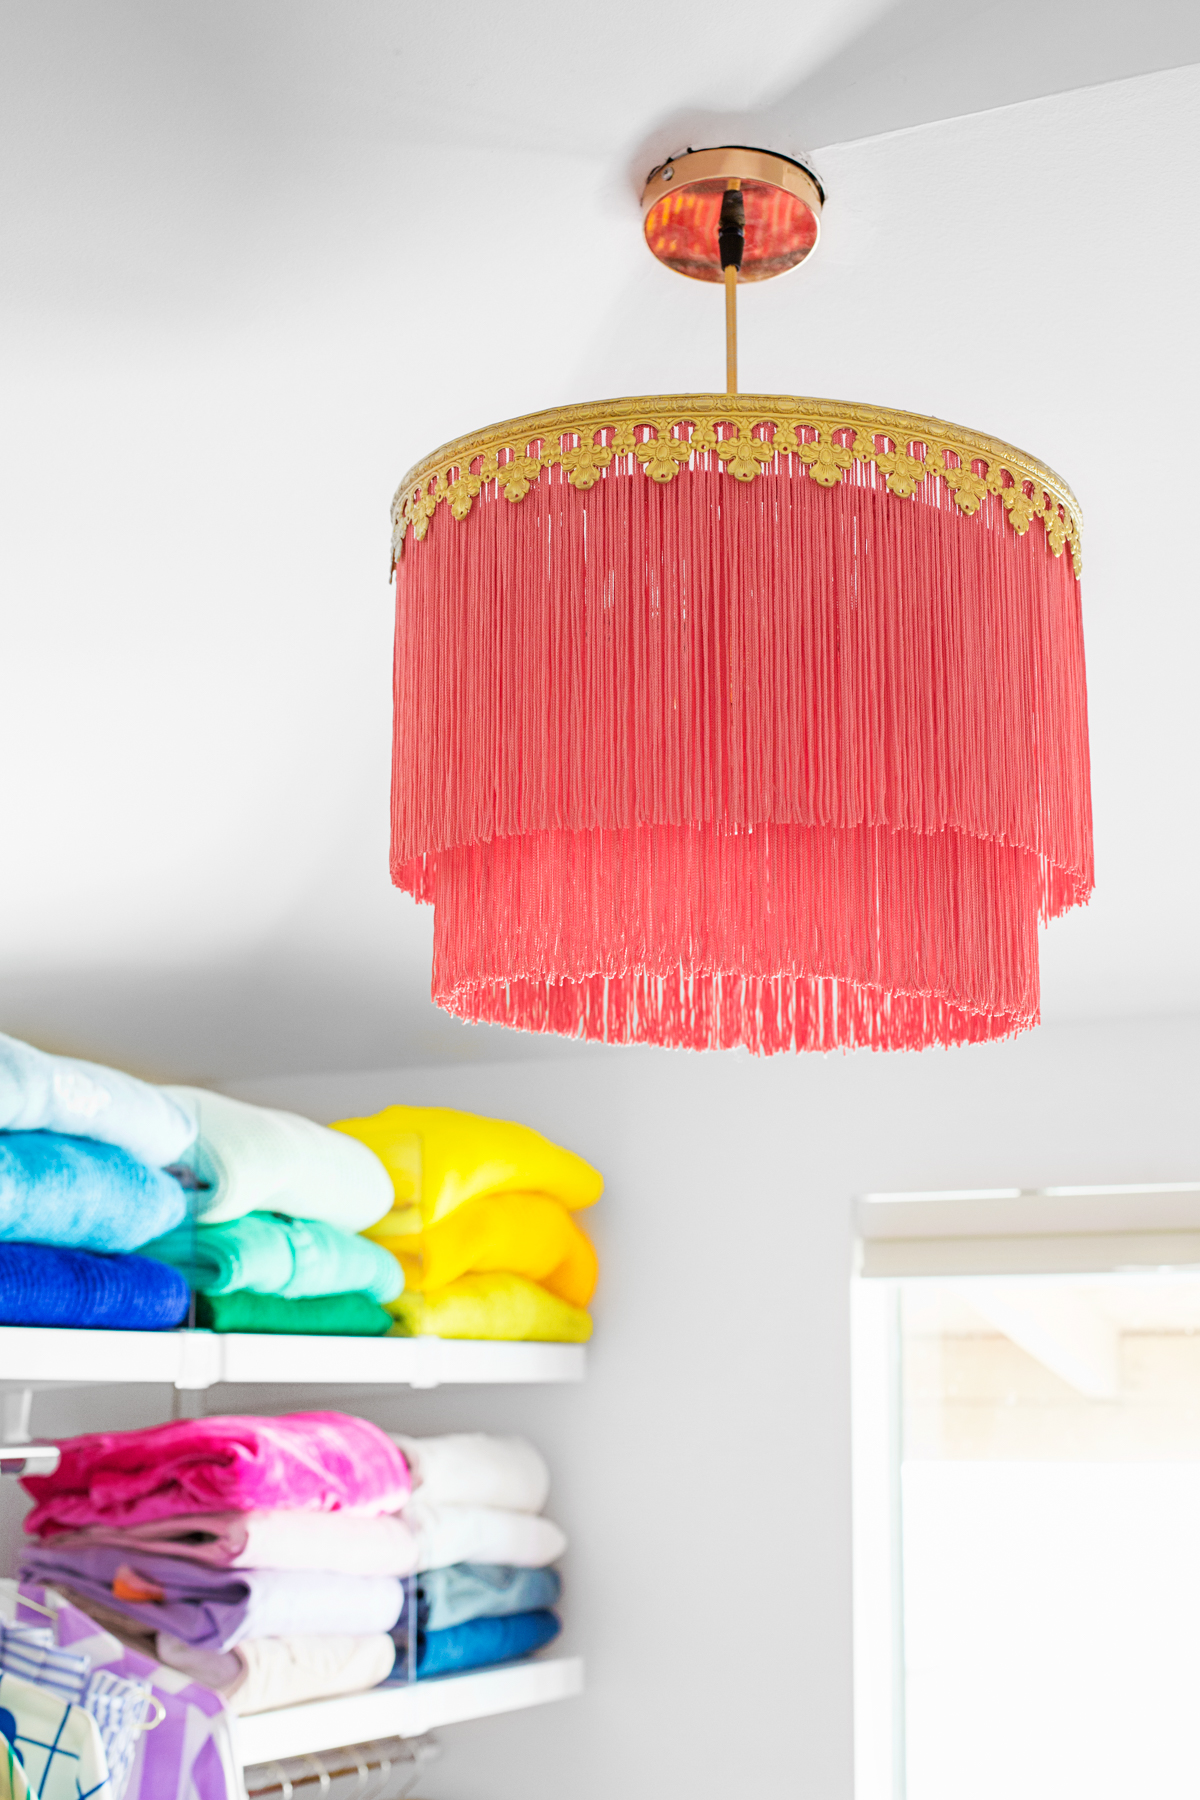 How To Make A Fringe Chandelier, How To Add Tassels Lampshade